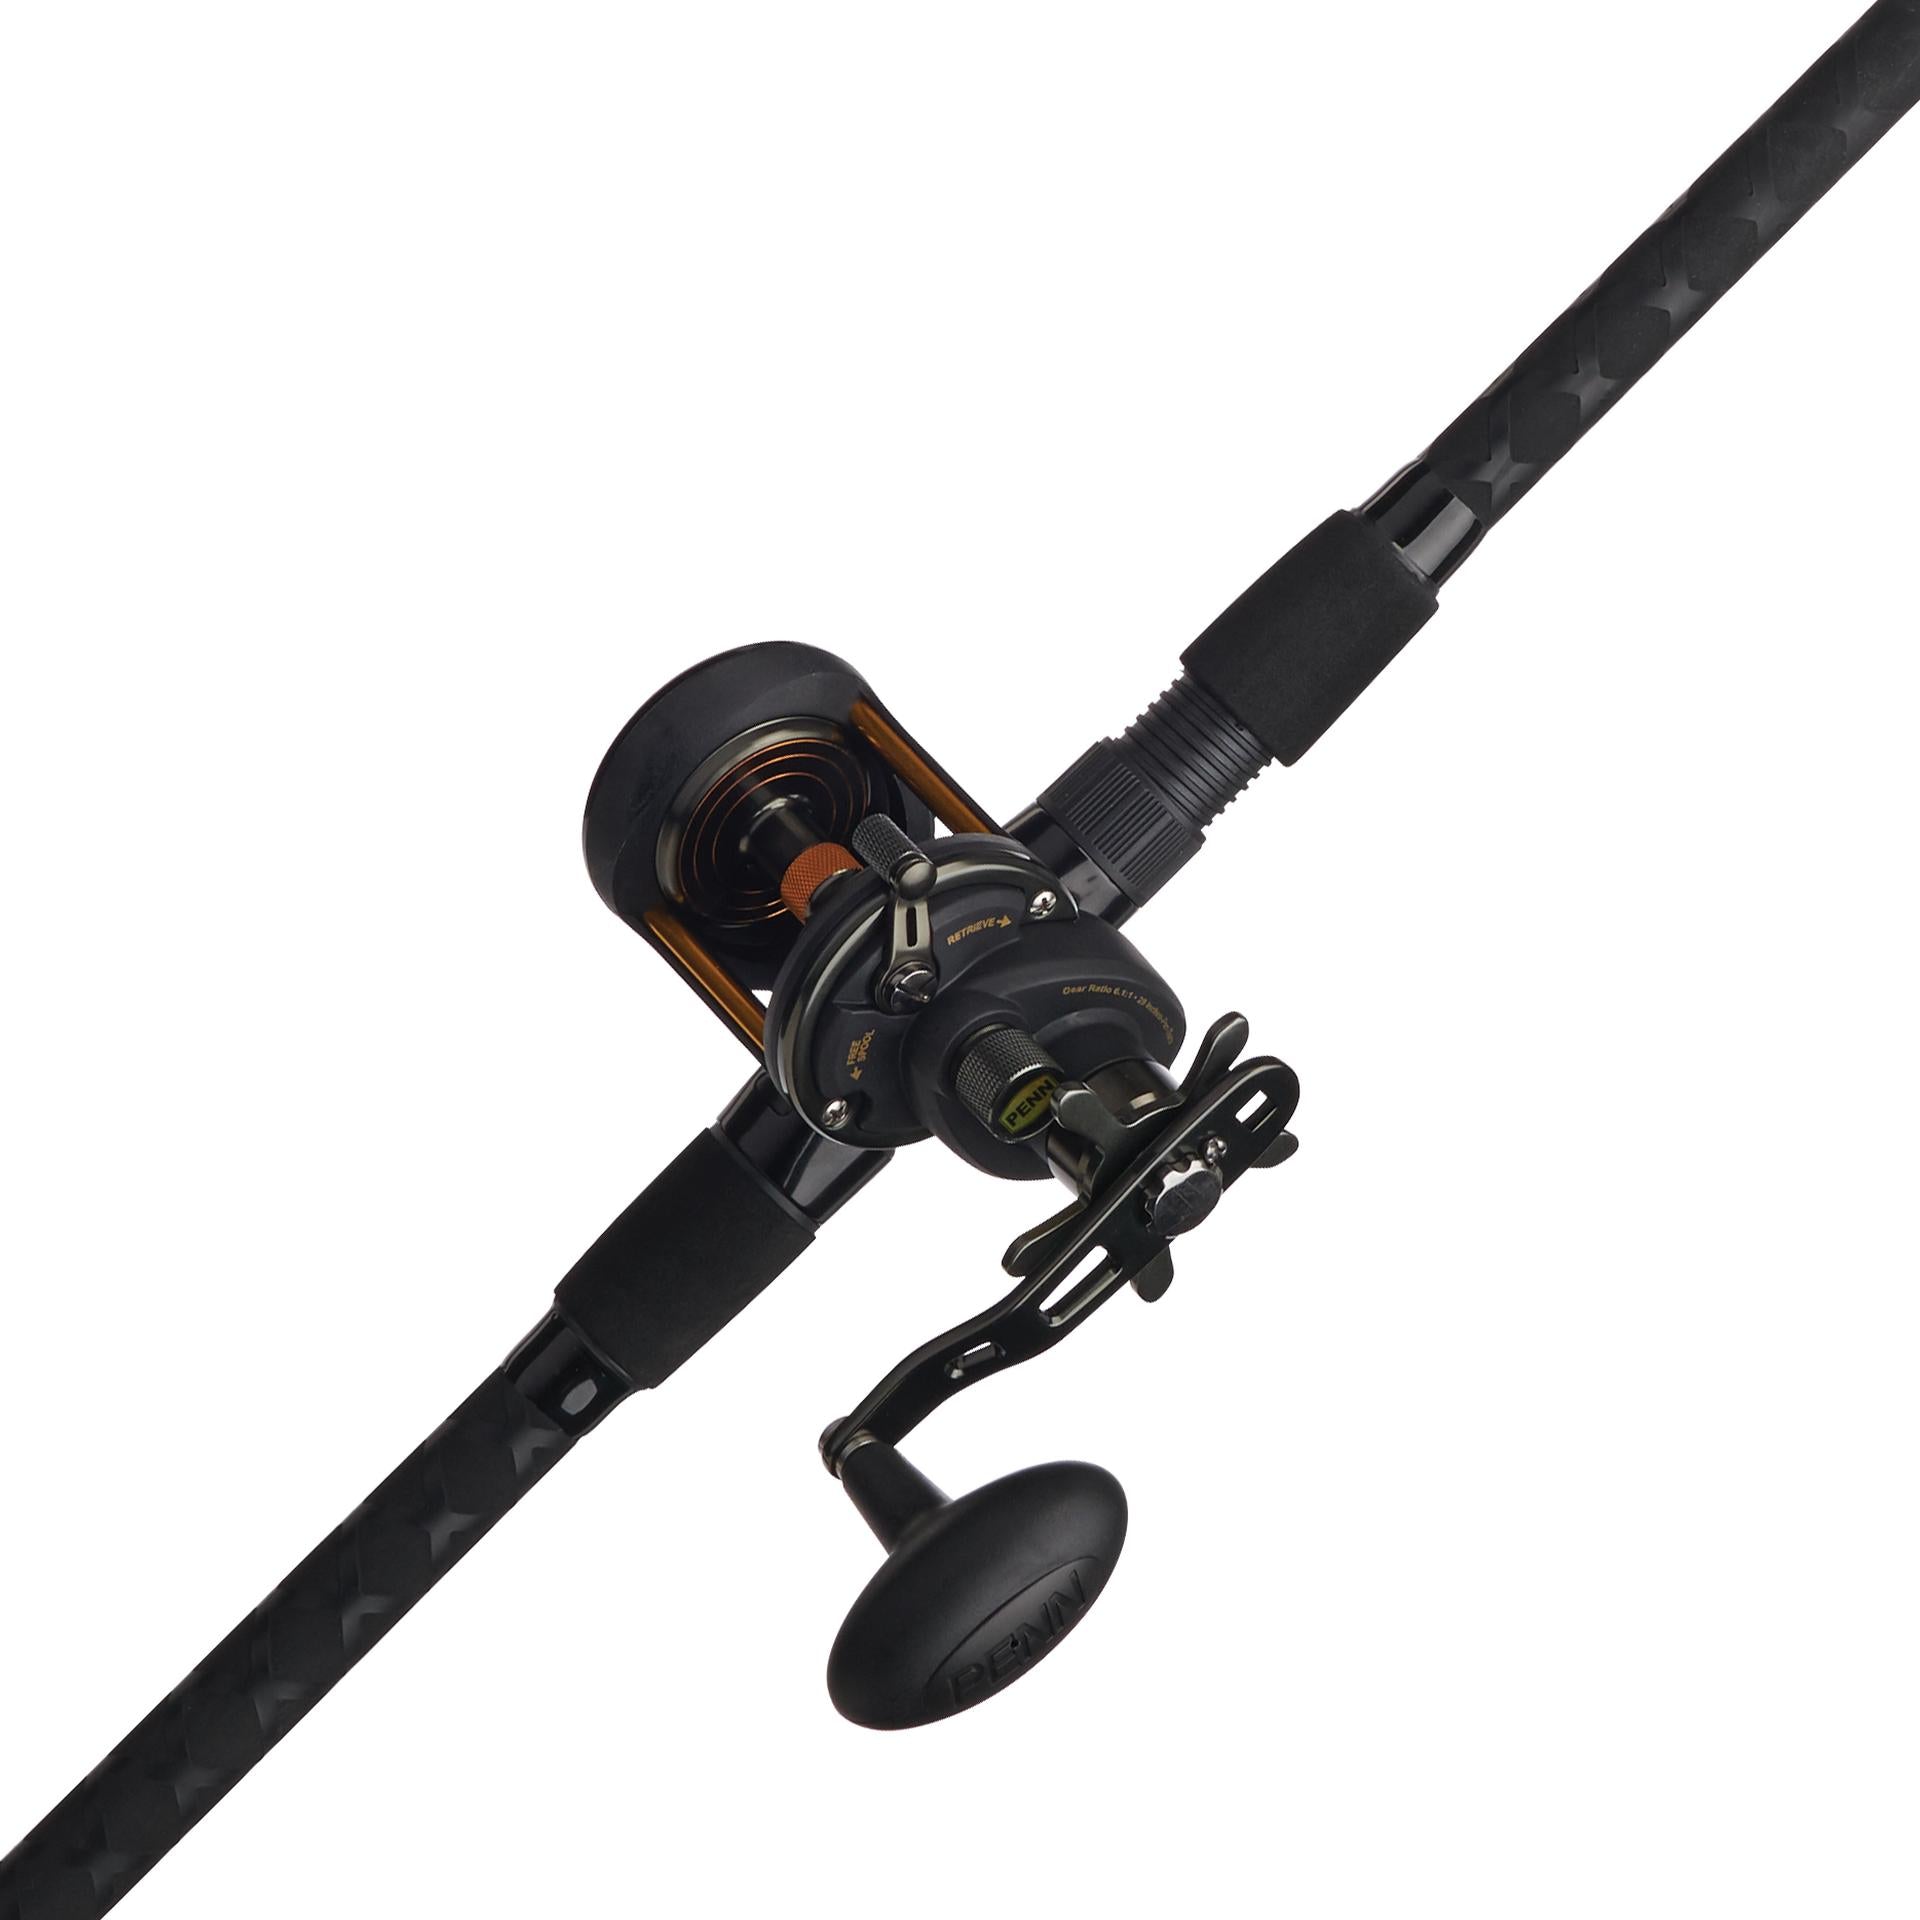 Penn 209LC General Purpose Level Wind Conventional Reels, Black